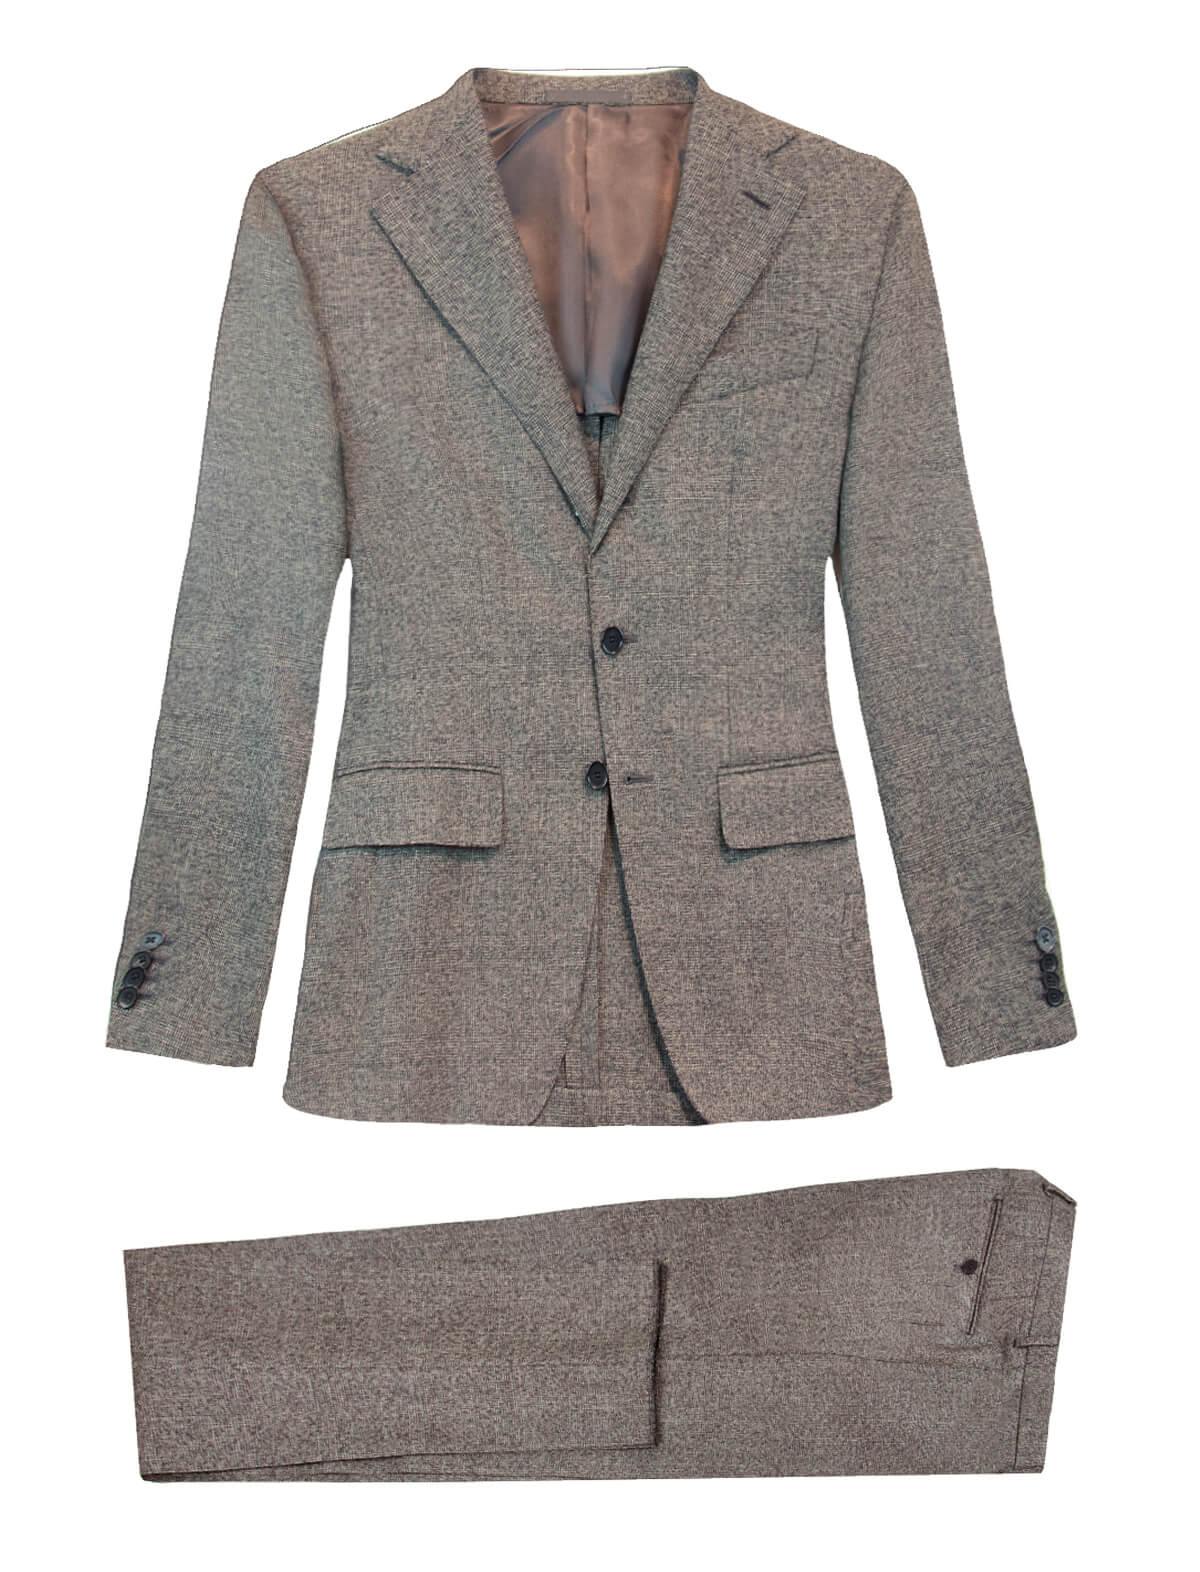 CARUSO 2-Piece Aida Wool Suit in Brown Black | CLOSET Singapore